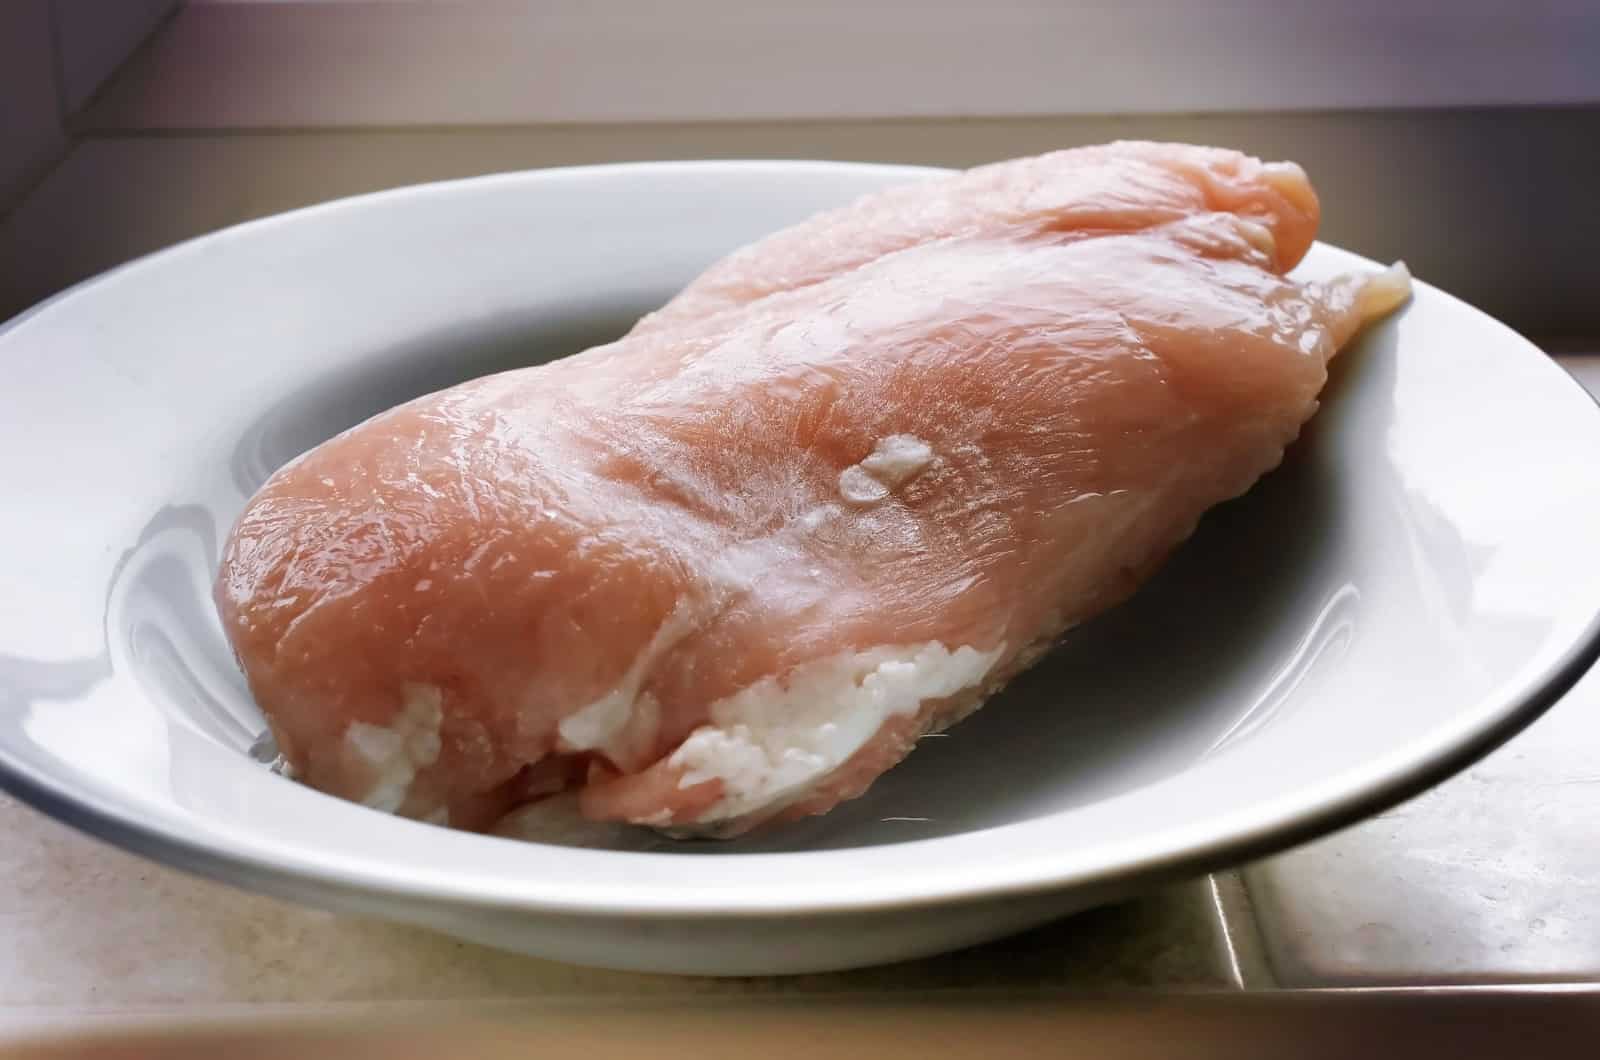 Frozen chicken breasts left to defrost in a bowl